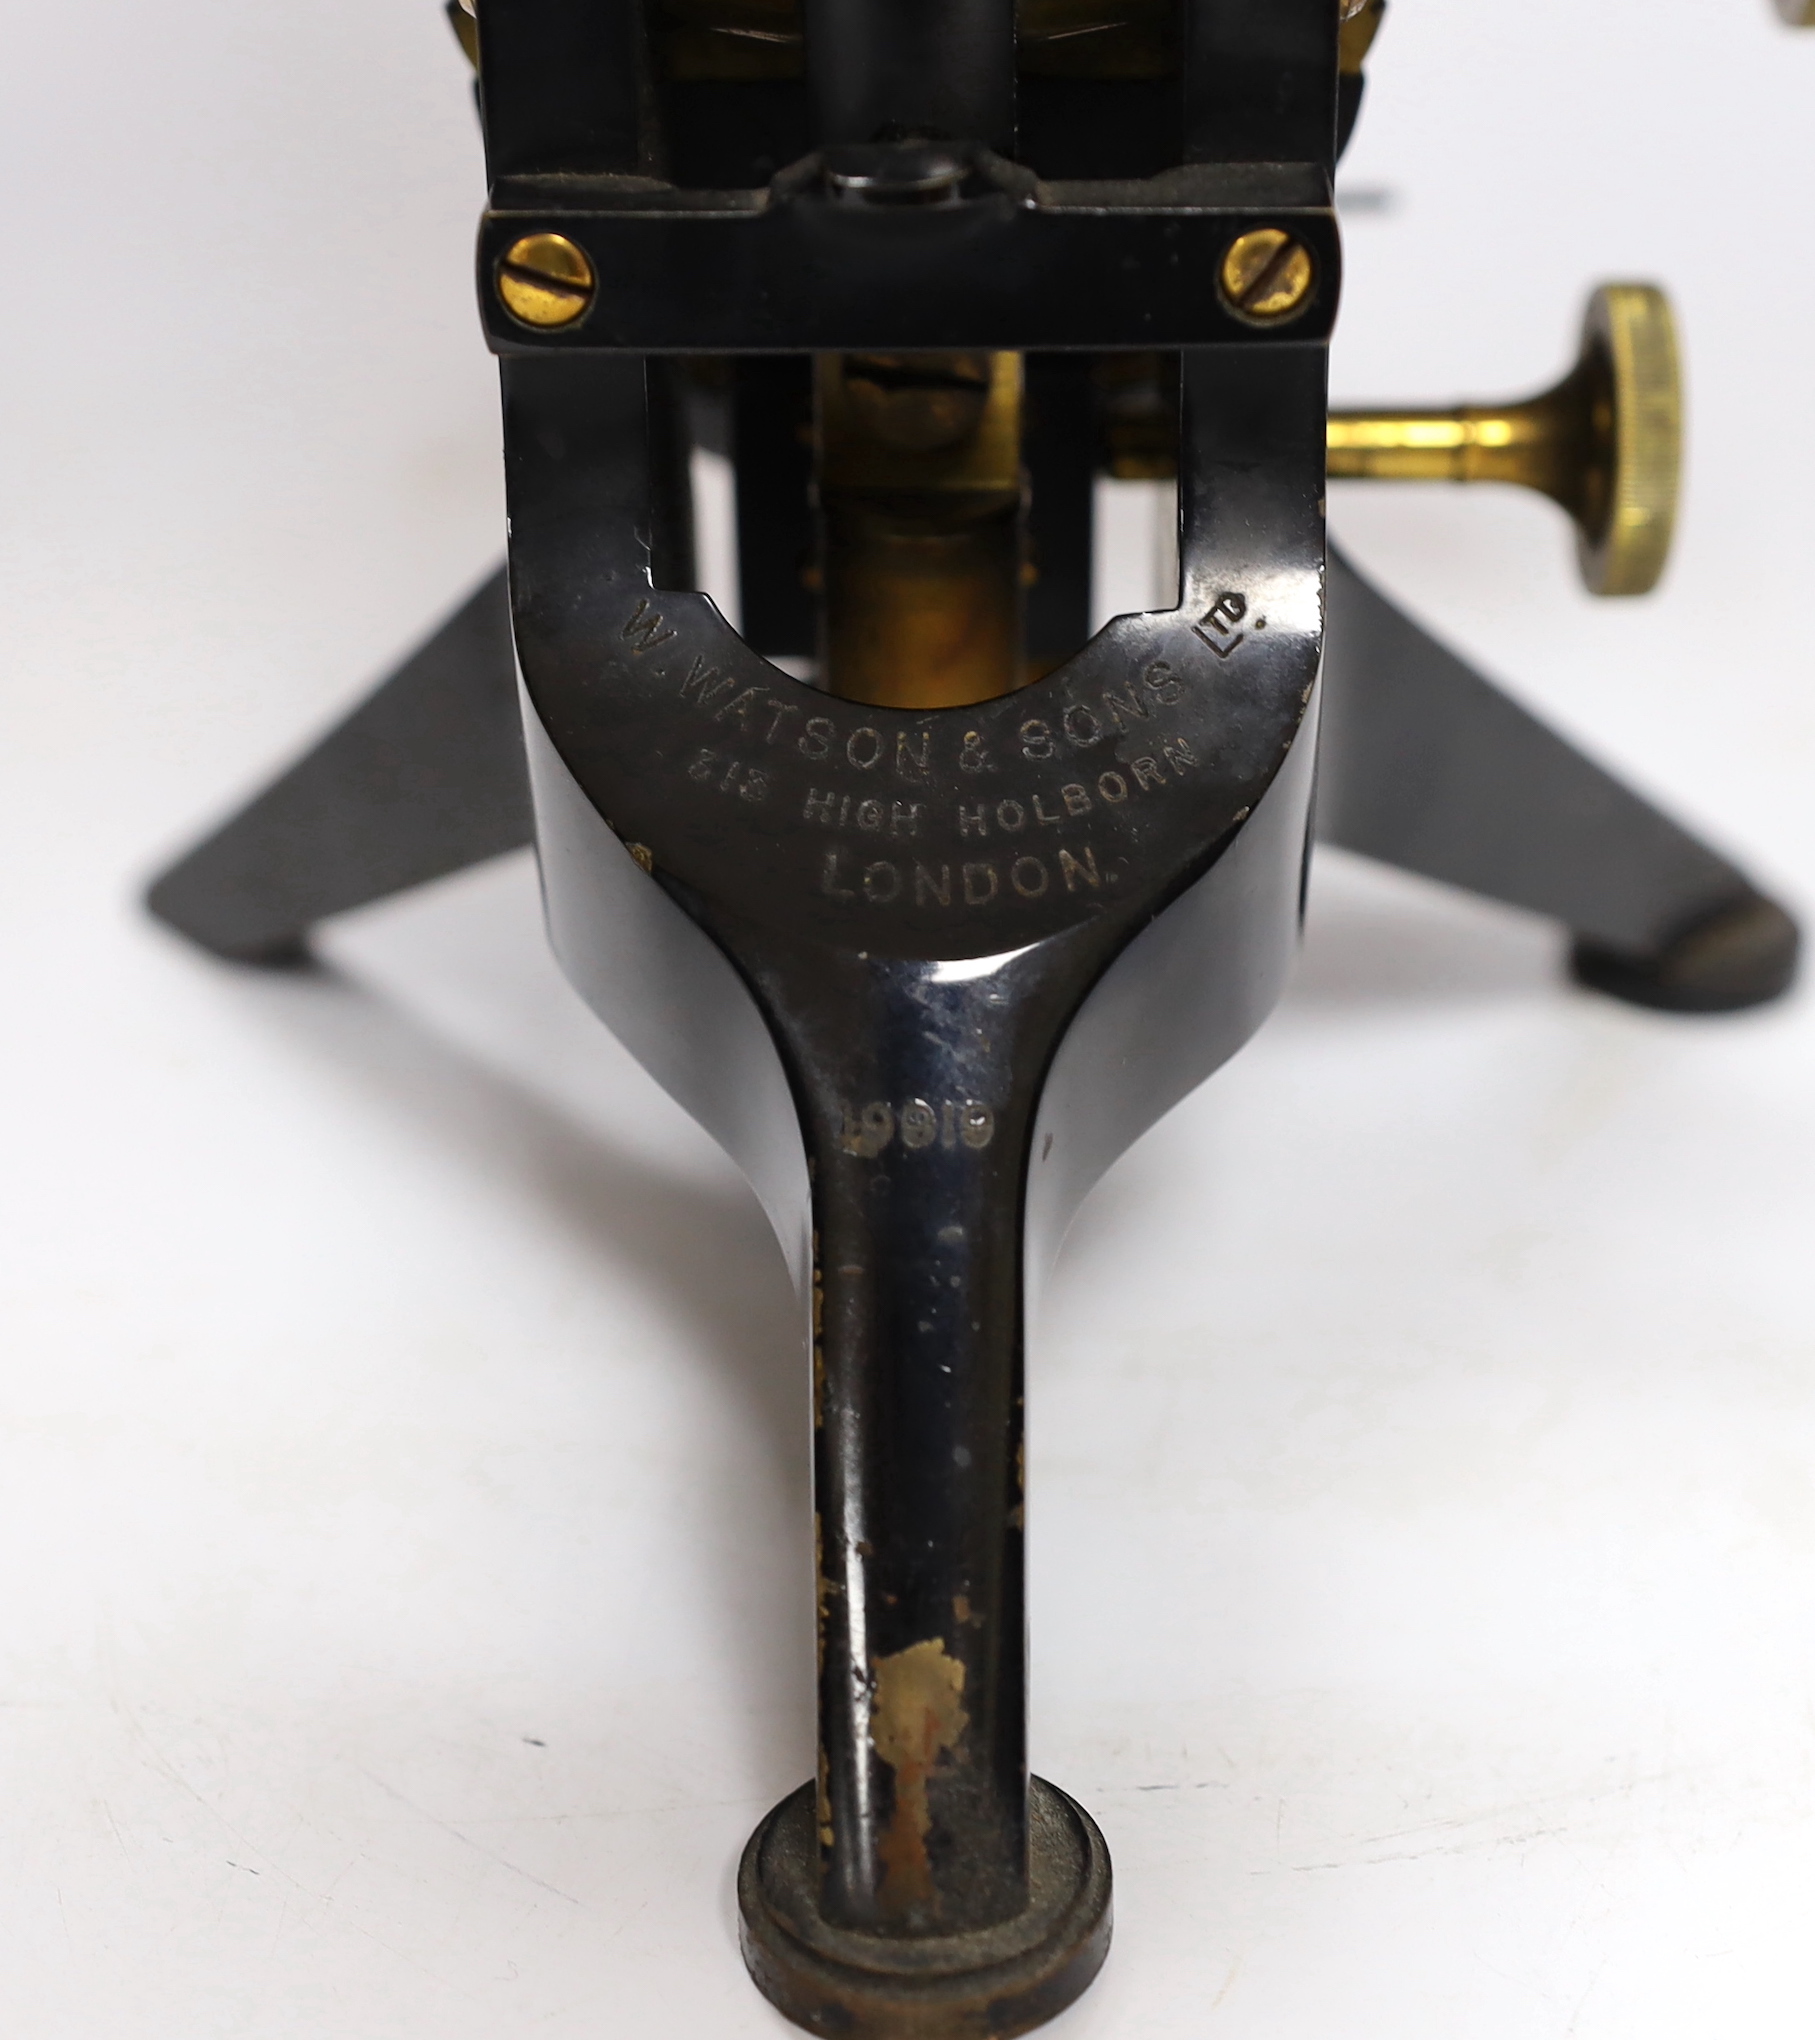 A Victorian monocular brass and black enamel microscope by W. Watson & Sons, High Holborn, in a mahogany carrying case, Serial no.19919, with a number of alternative lens of different magnification, case 34.5cm high